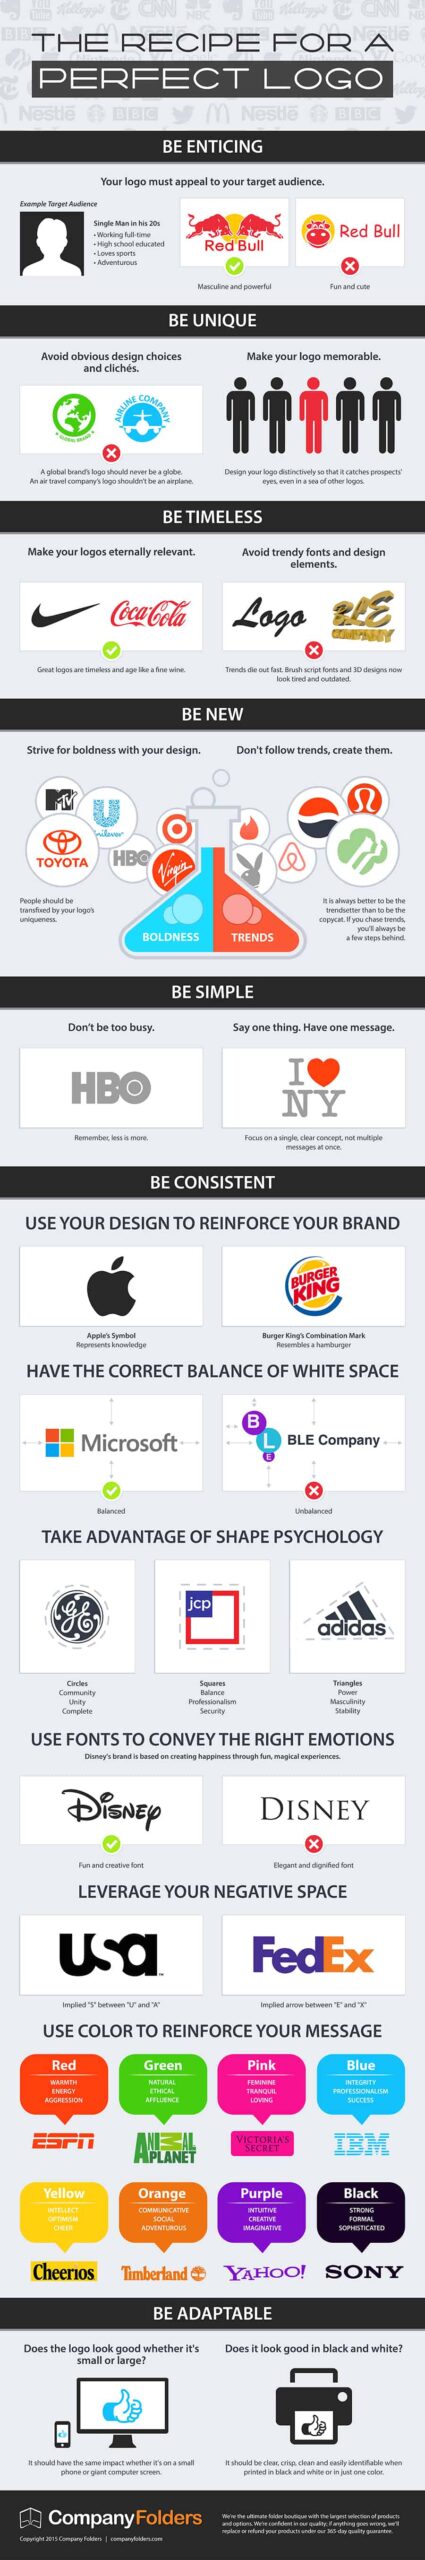 An Infographic Illustrating the Evolution of Corporate Logos